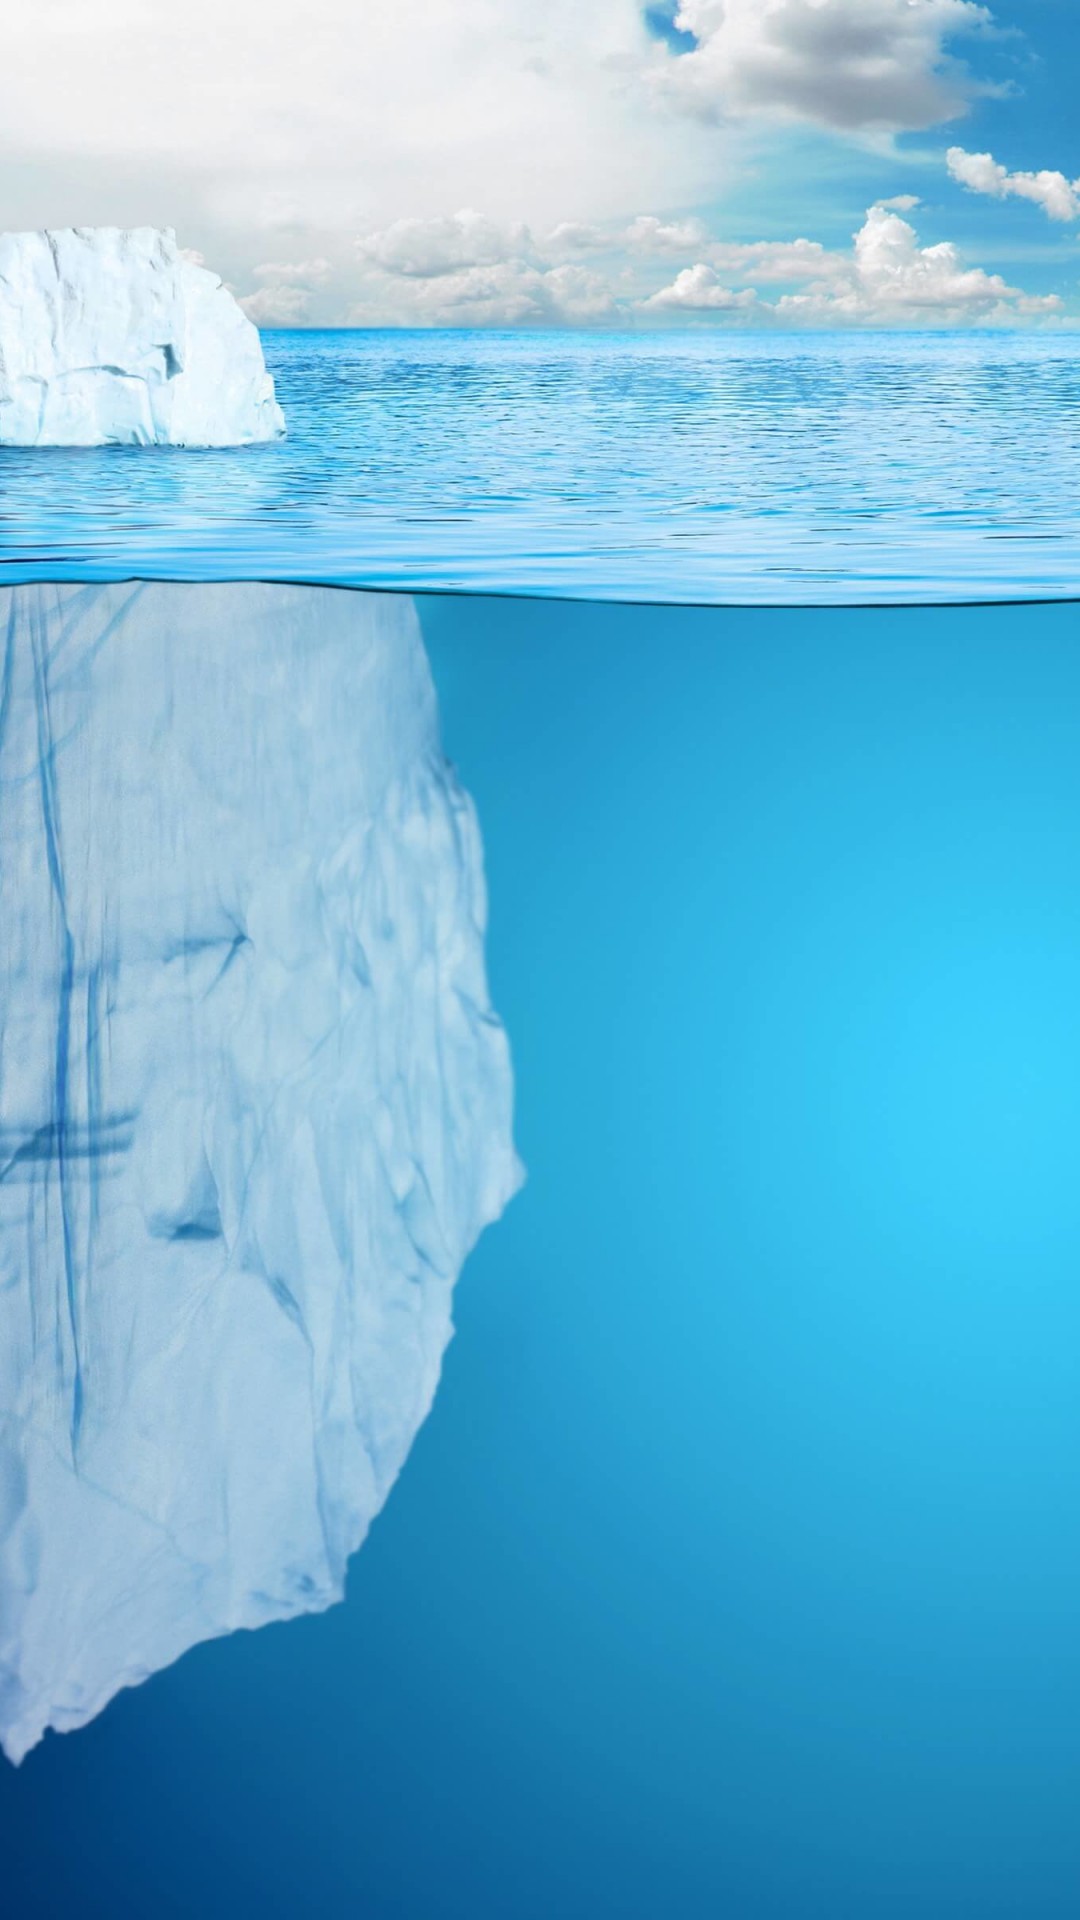 The invisible part of the iceberg Wallpaper for Google Nexus 5